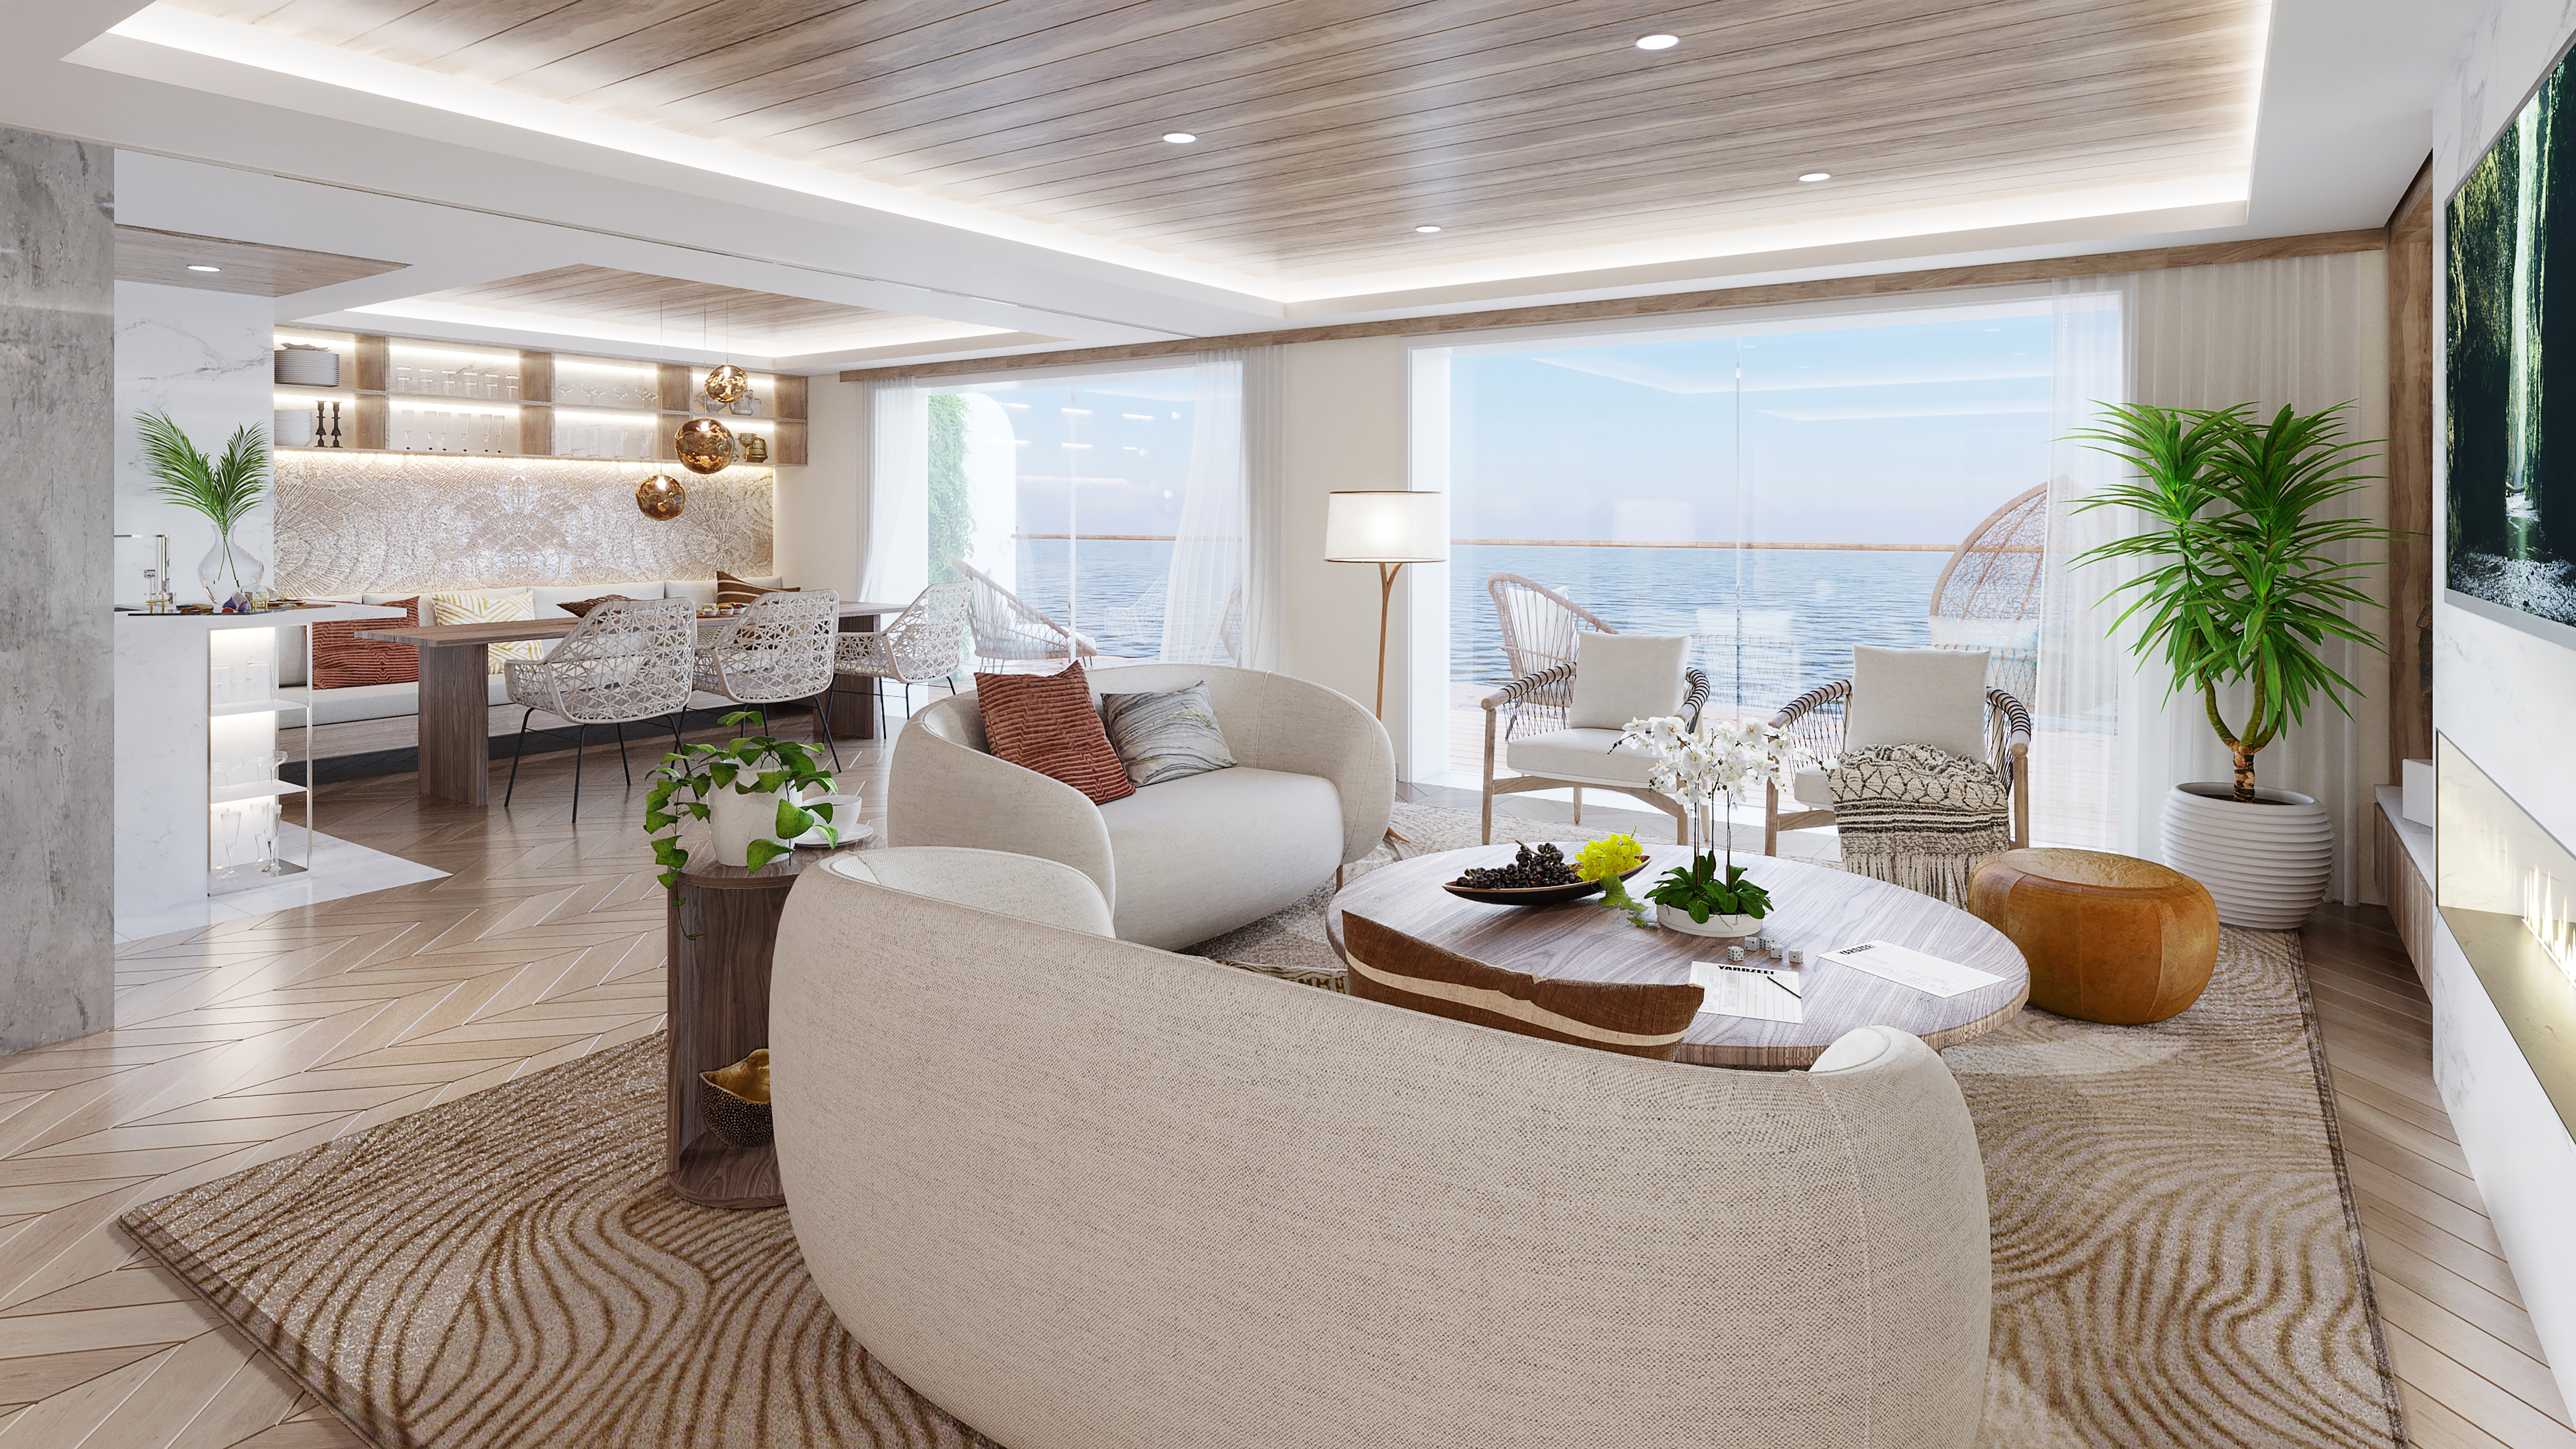 A residential cruise ship lounge  designed for lifestyle travel